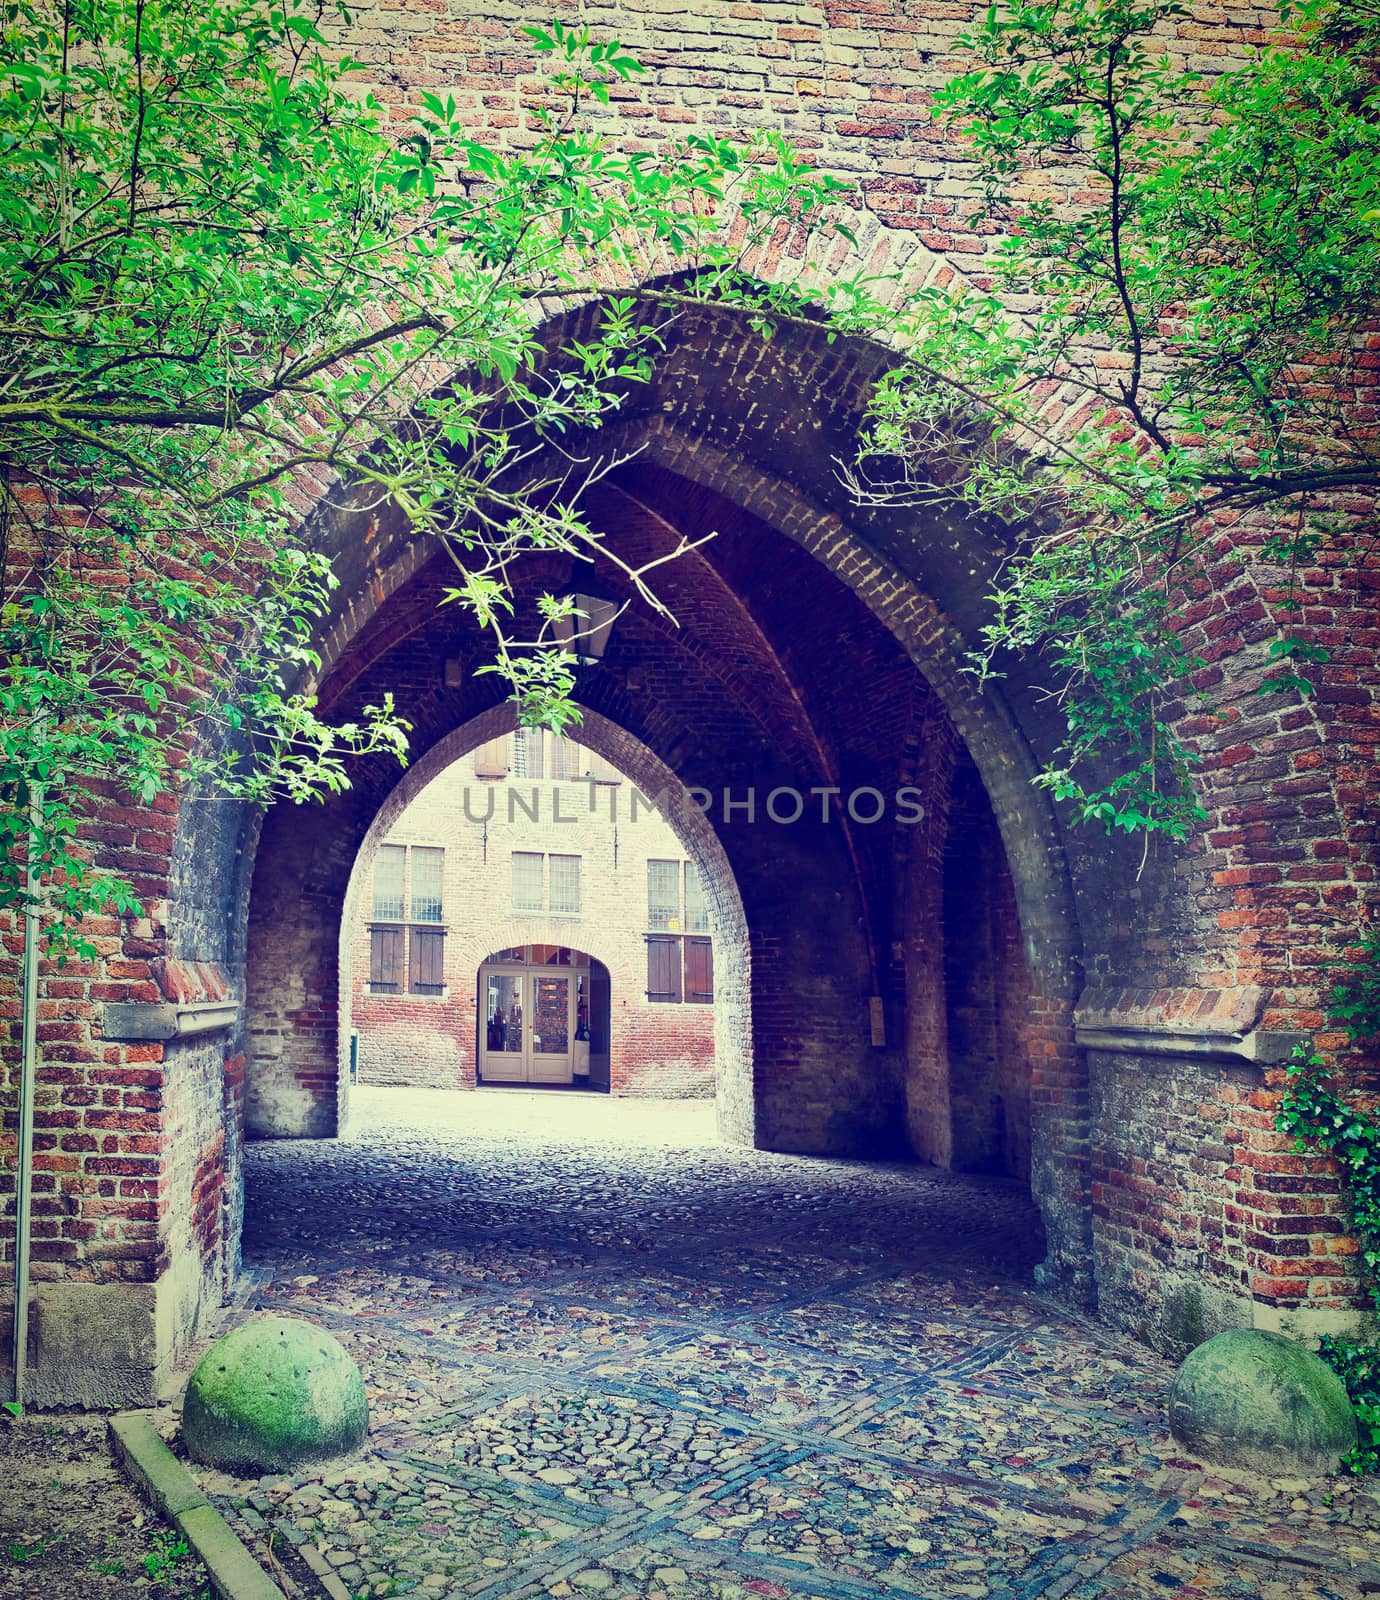 Arched Entrance to the Courtyard in the Dutch City of Zutphen, Instagram Effect